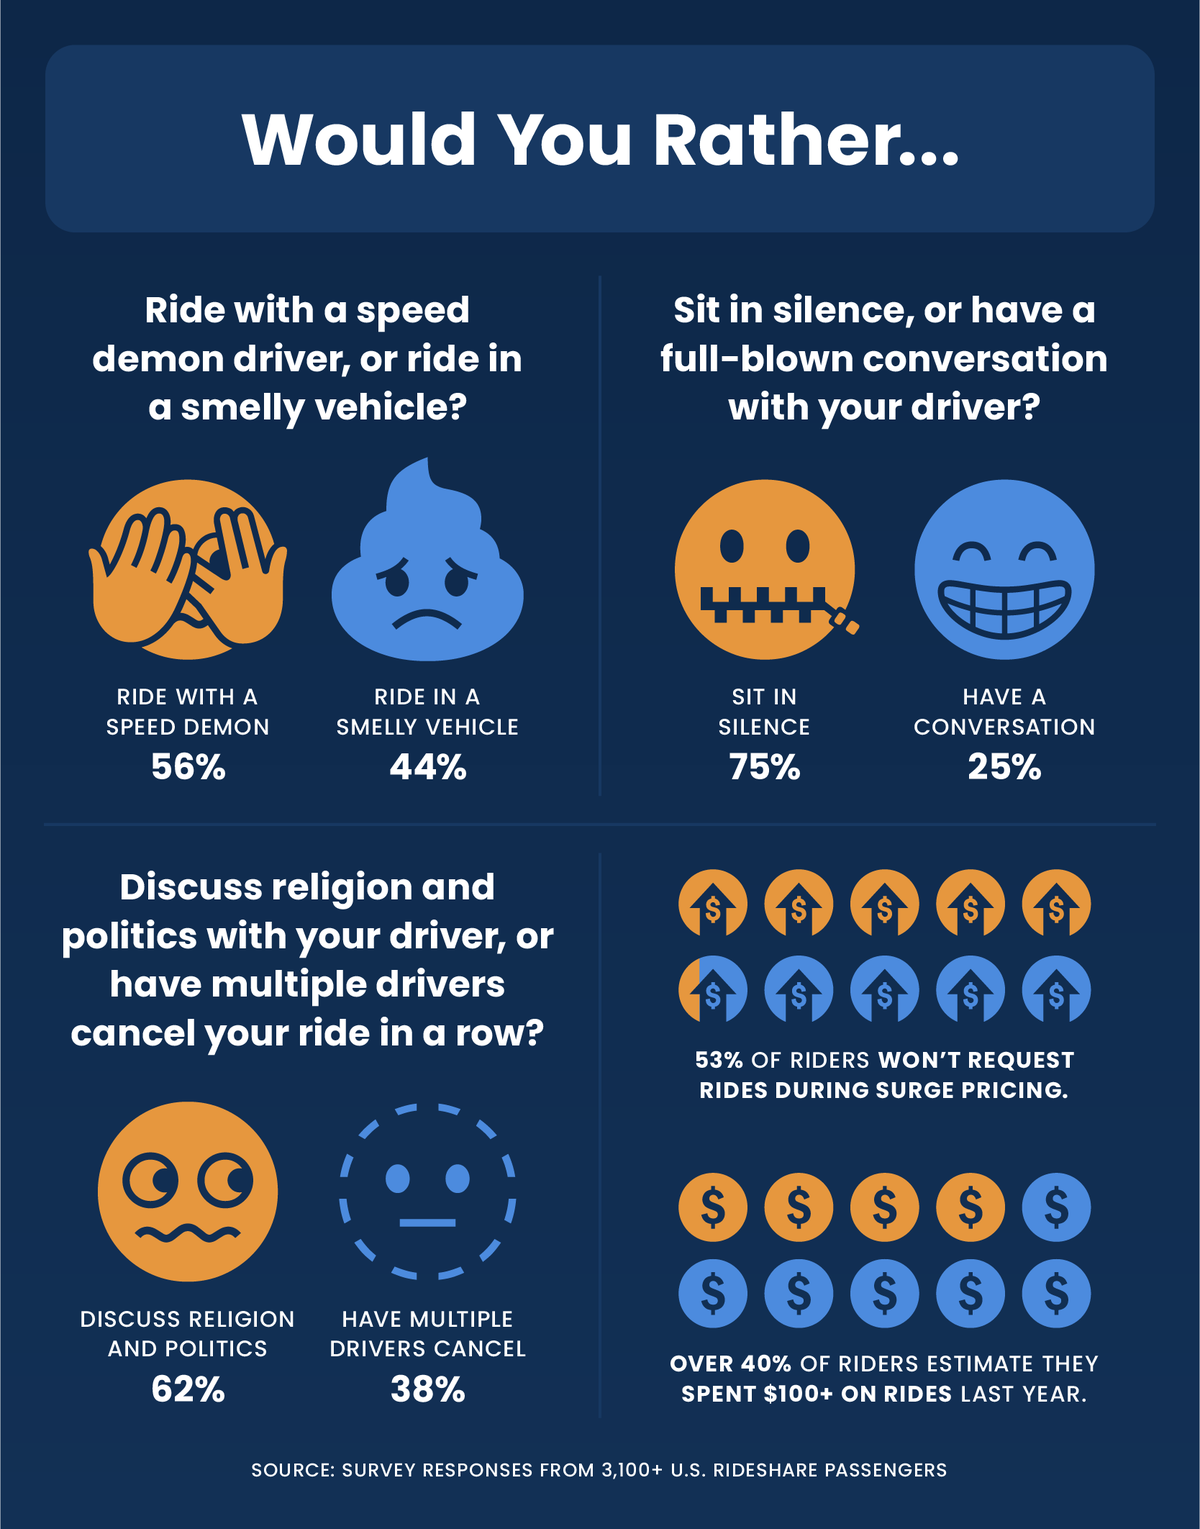 Infographic displaying what experience rideshare users would rather do